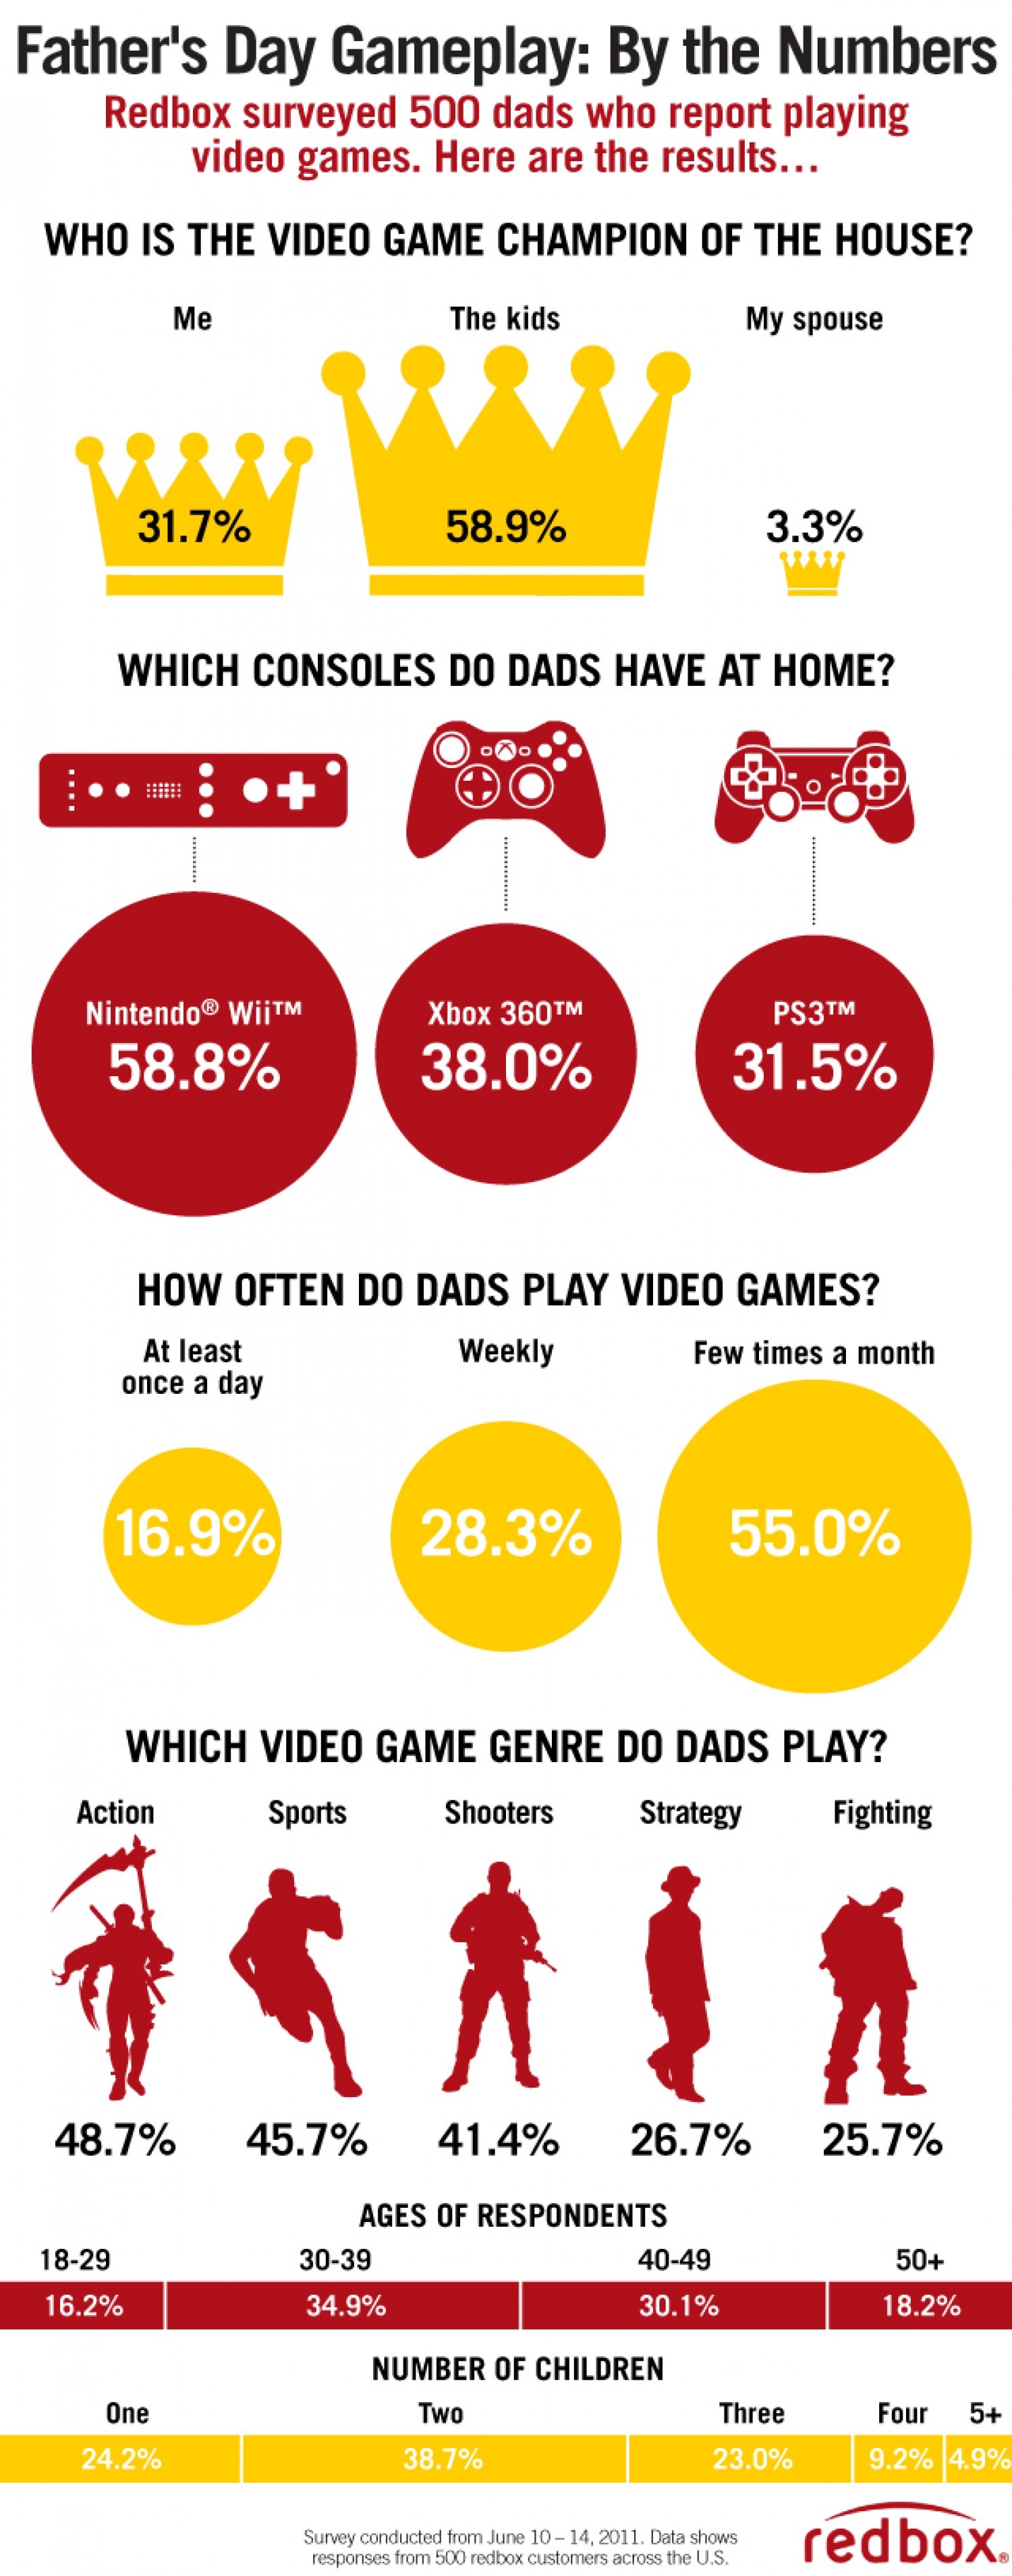 14. Father's Day Gameplay by the Numbers